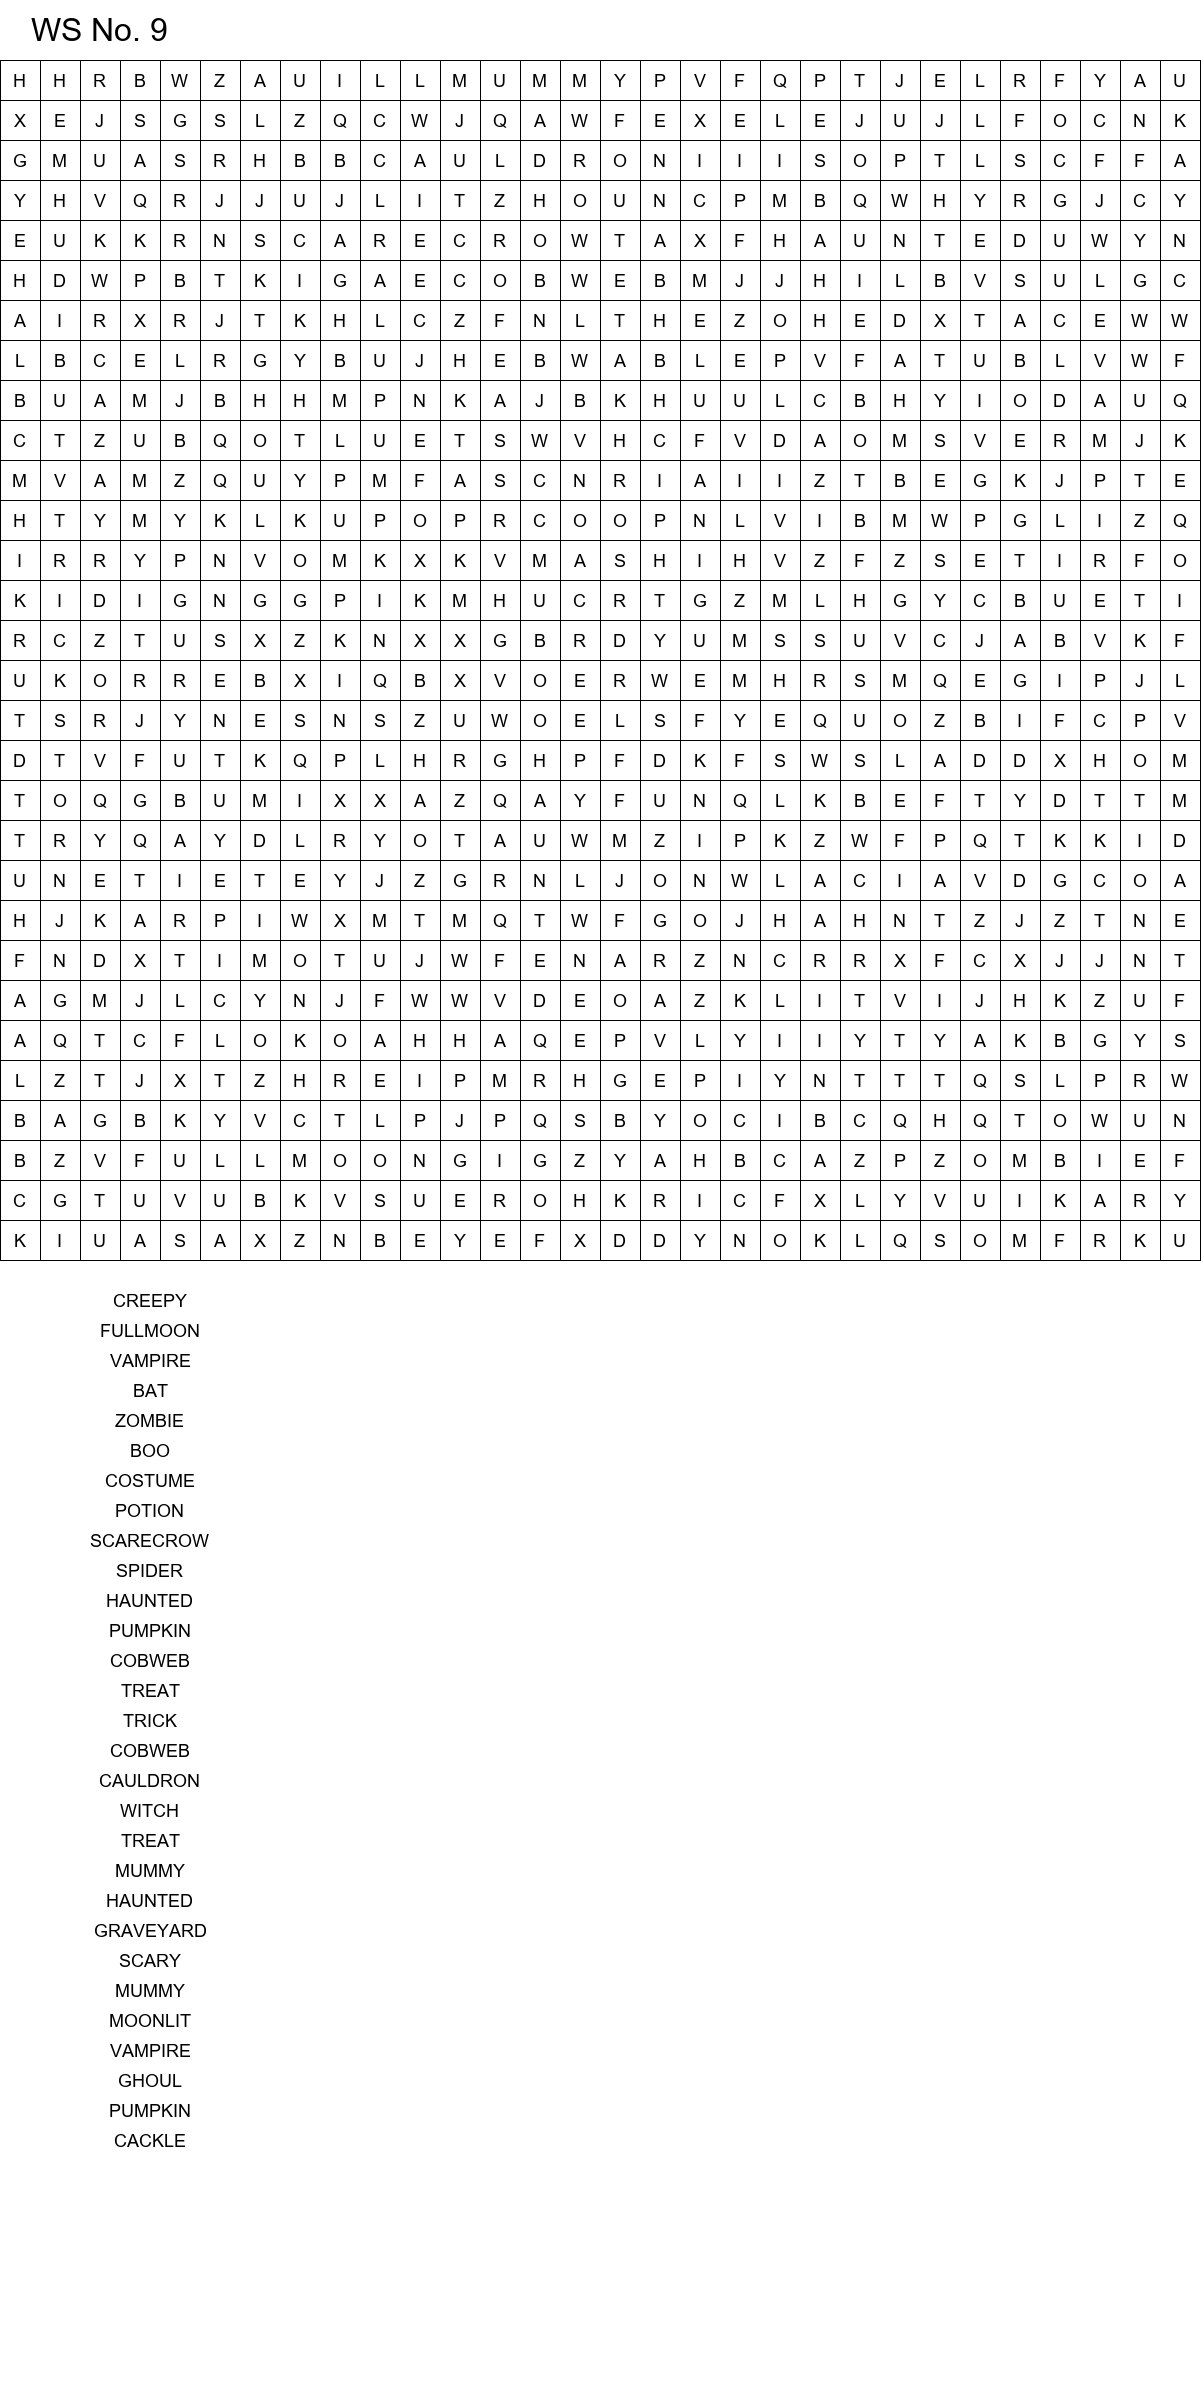 Challenging Halloween word search for adults size 30x30 No 9